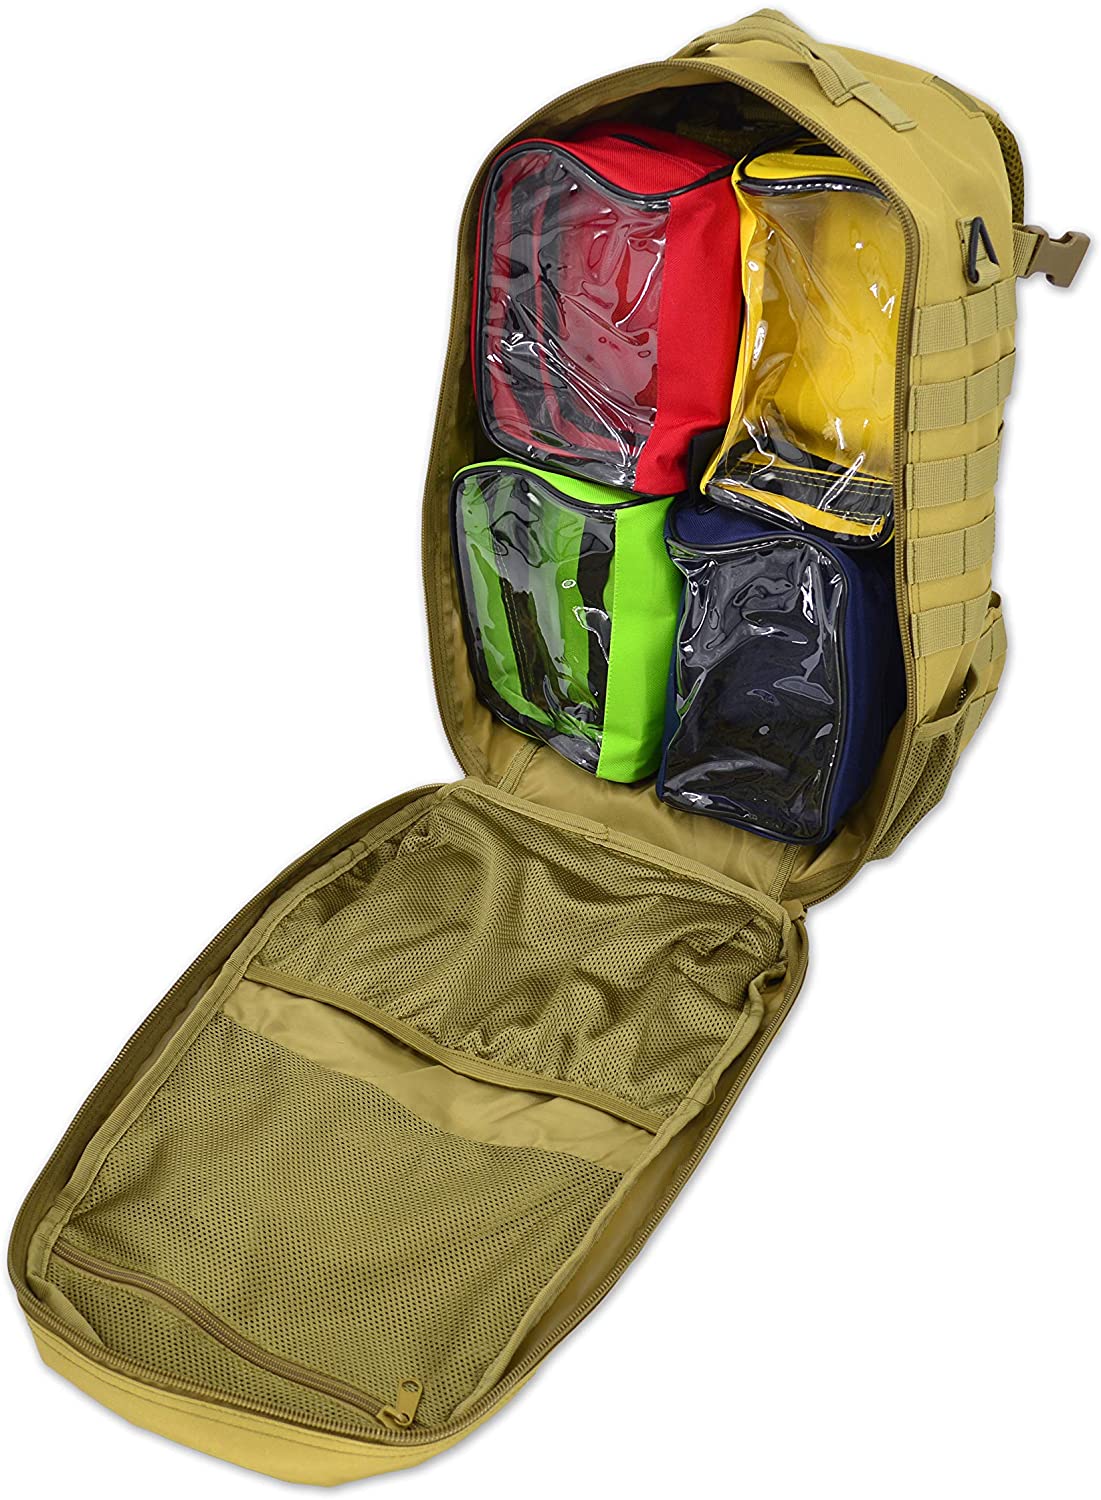 Lightning X Premium Tactical Medic Backpack w/ Modular Pouches & Hydration Port - image 4 of 8